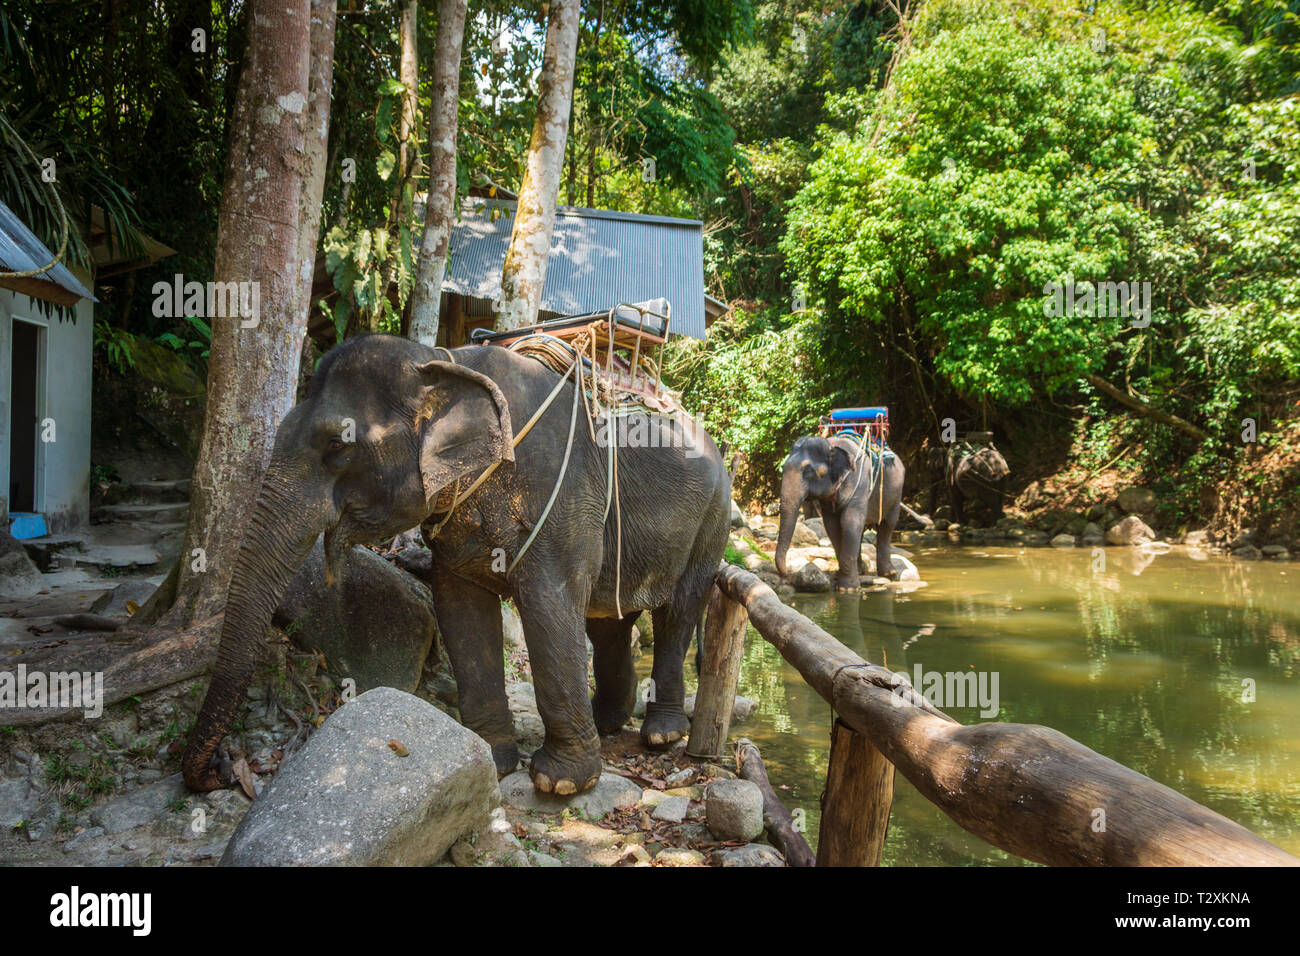 Thai elephants, Elephas maximus indicus, with saddles on the back resting on the river bank in the jungle Stock Photo